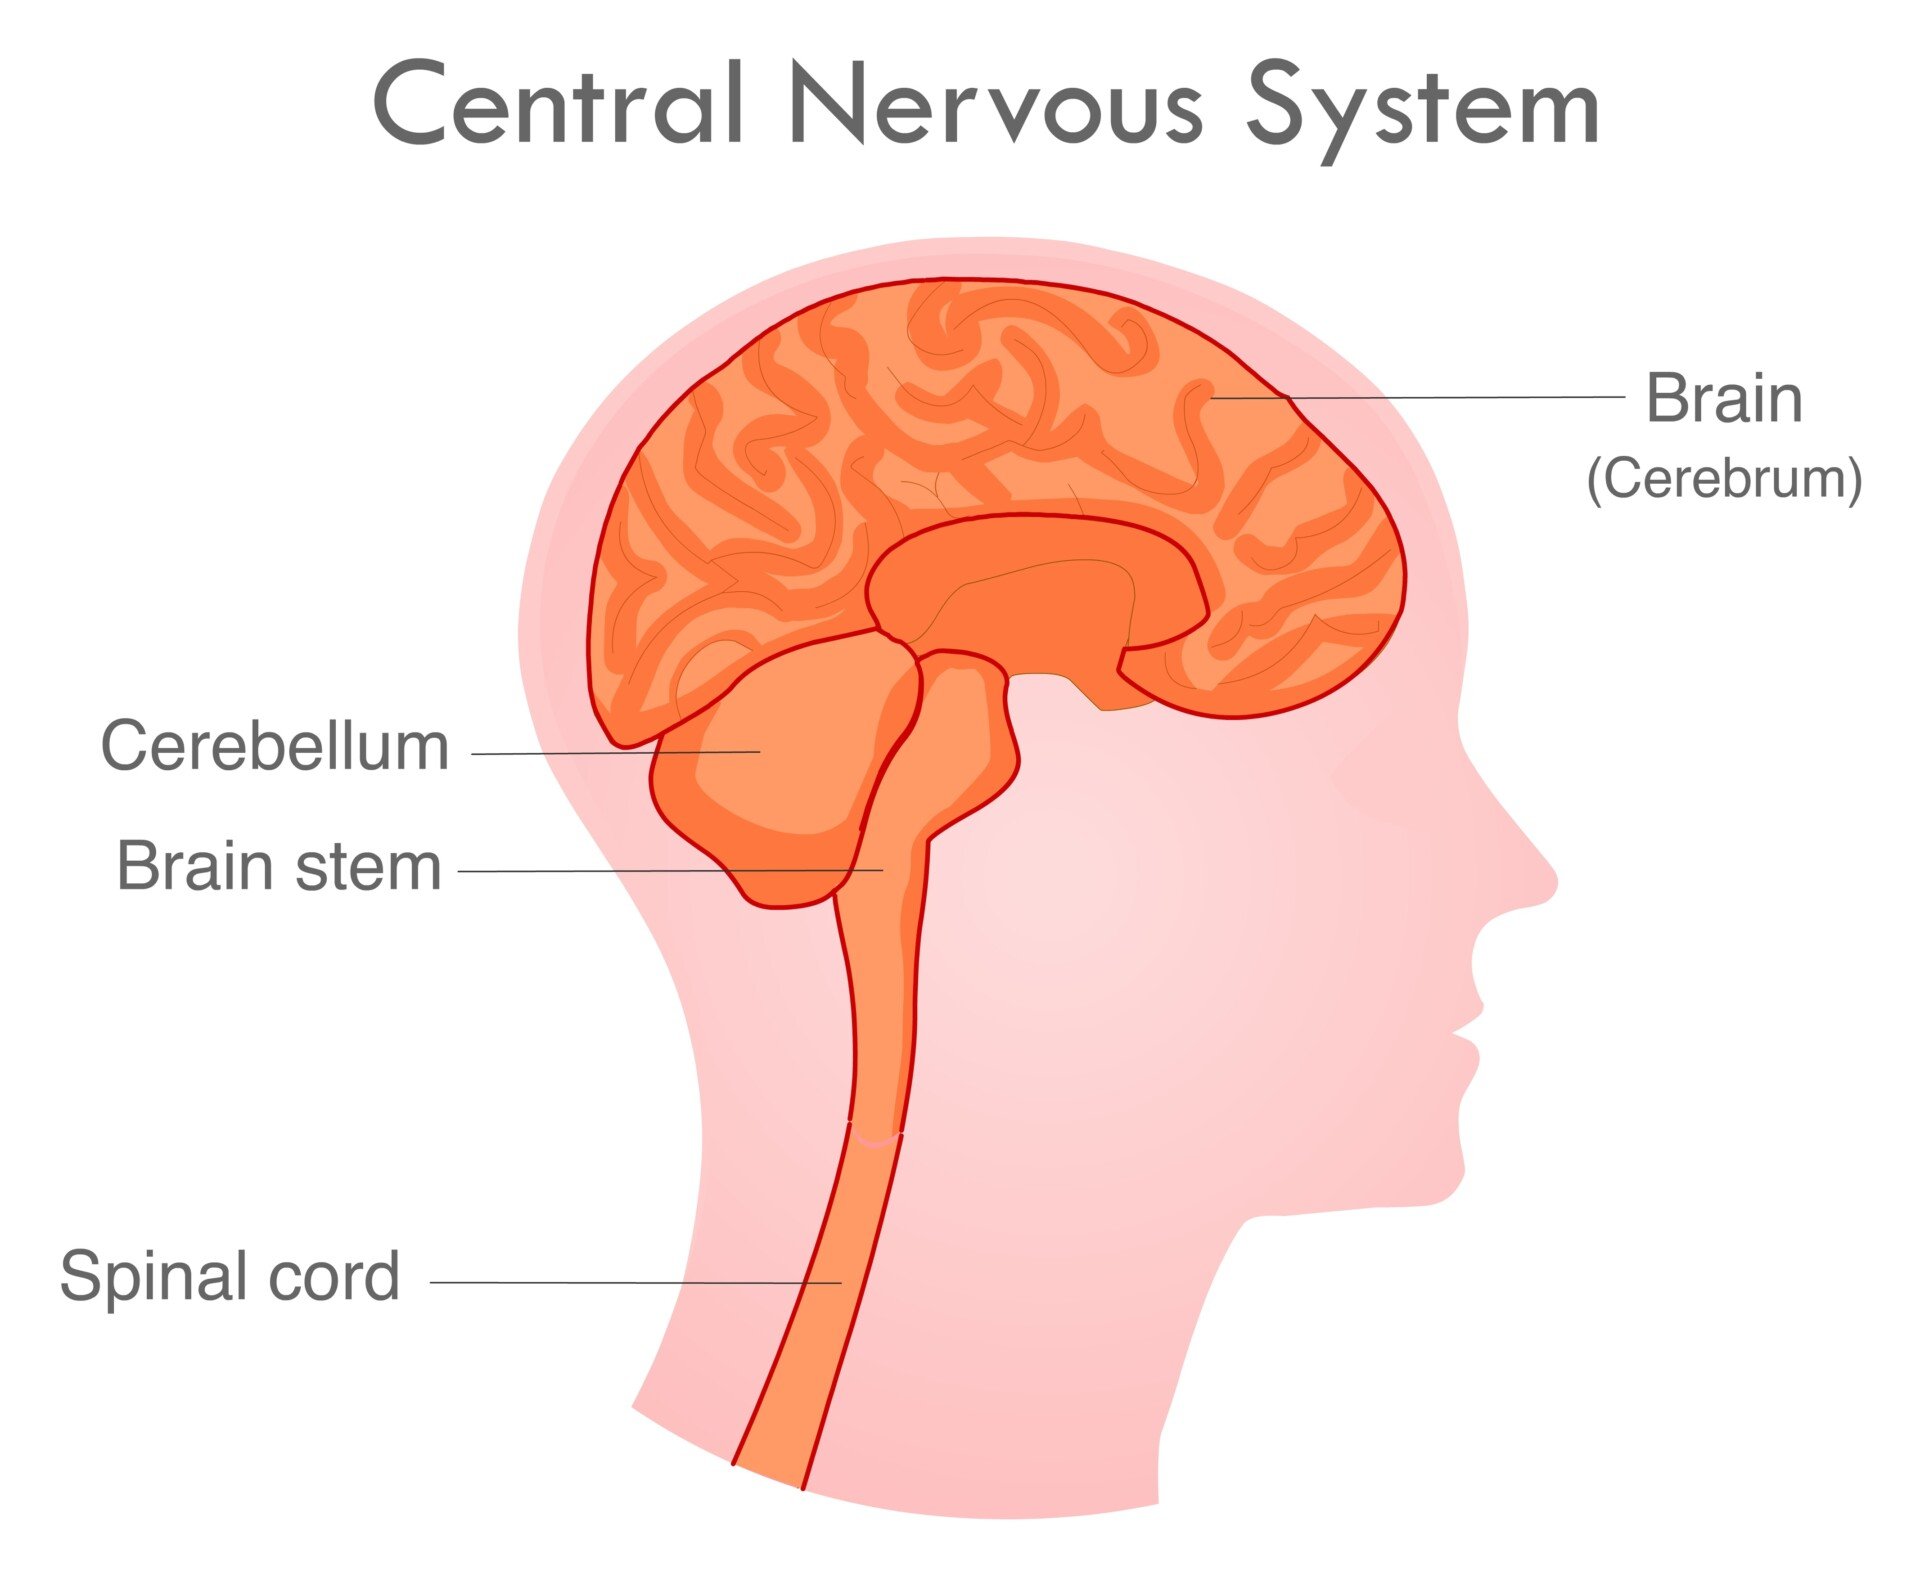 image of the central nervous system